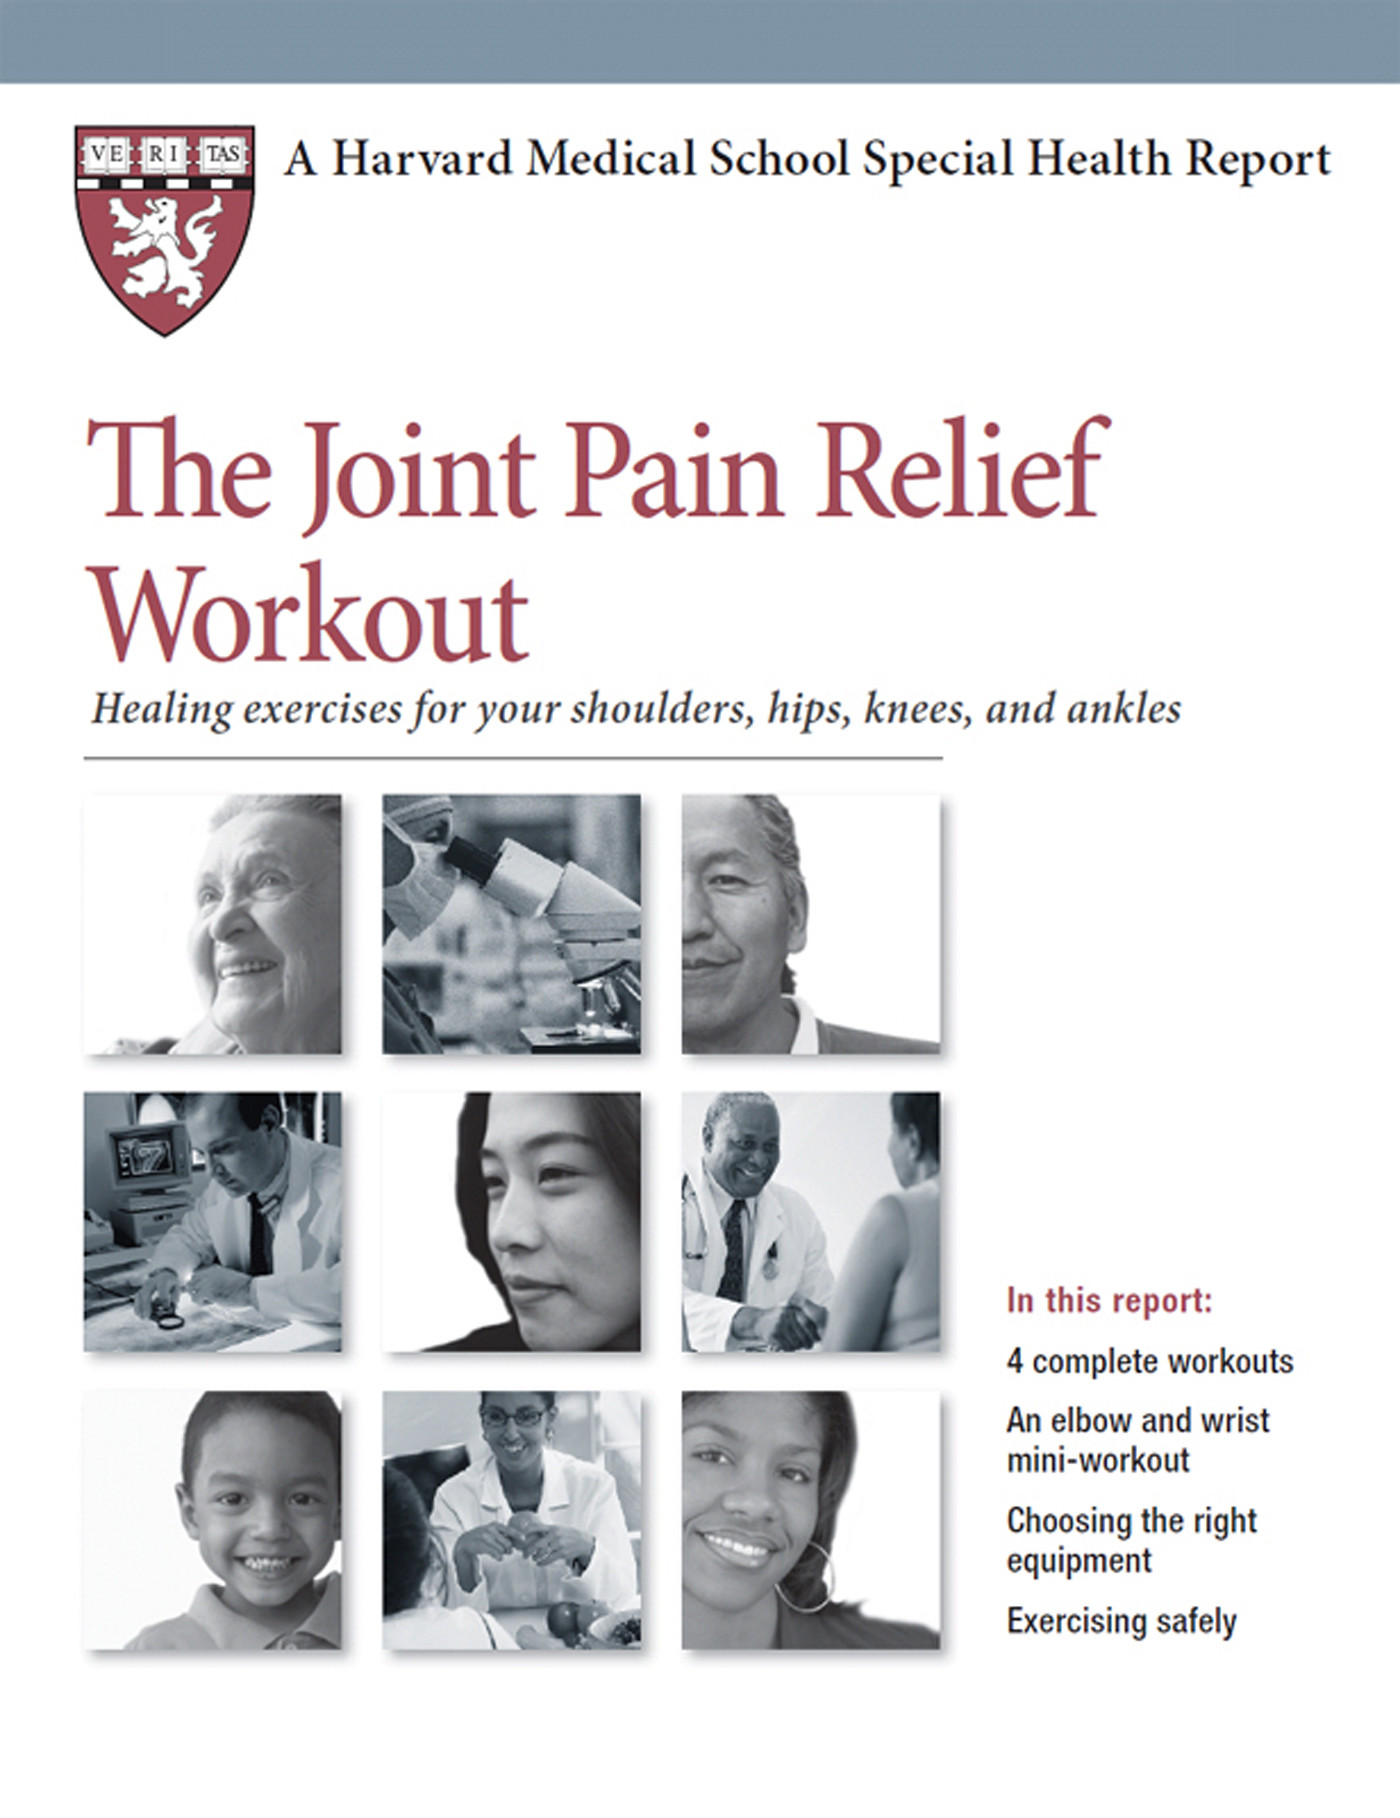 The Joint Pain Relief Workout